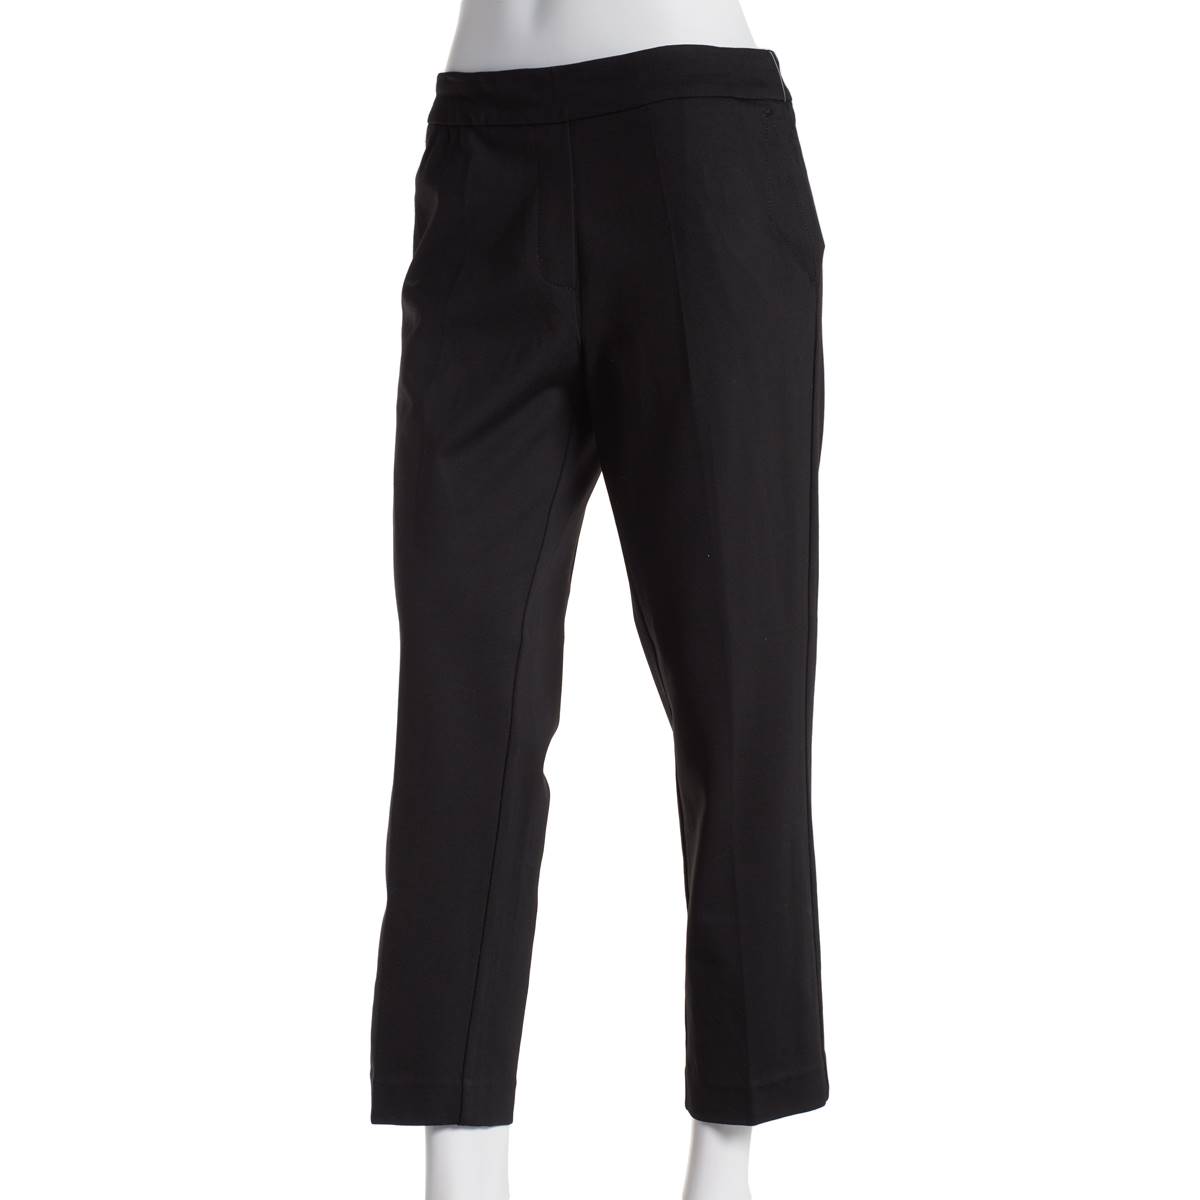 Petite Zac & Rachel Solid Pull On Compression Pants